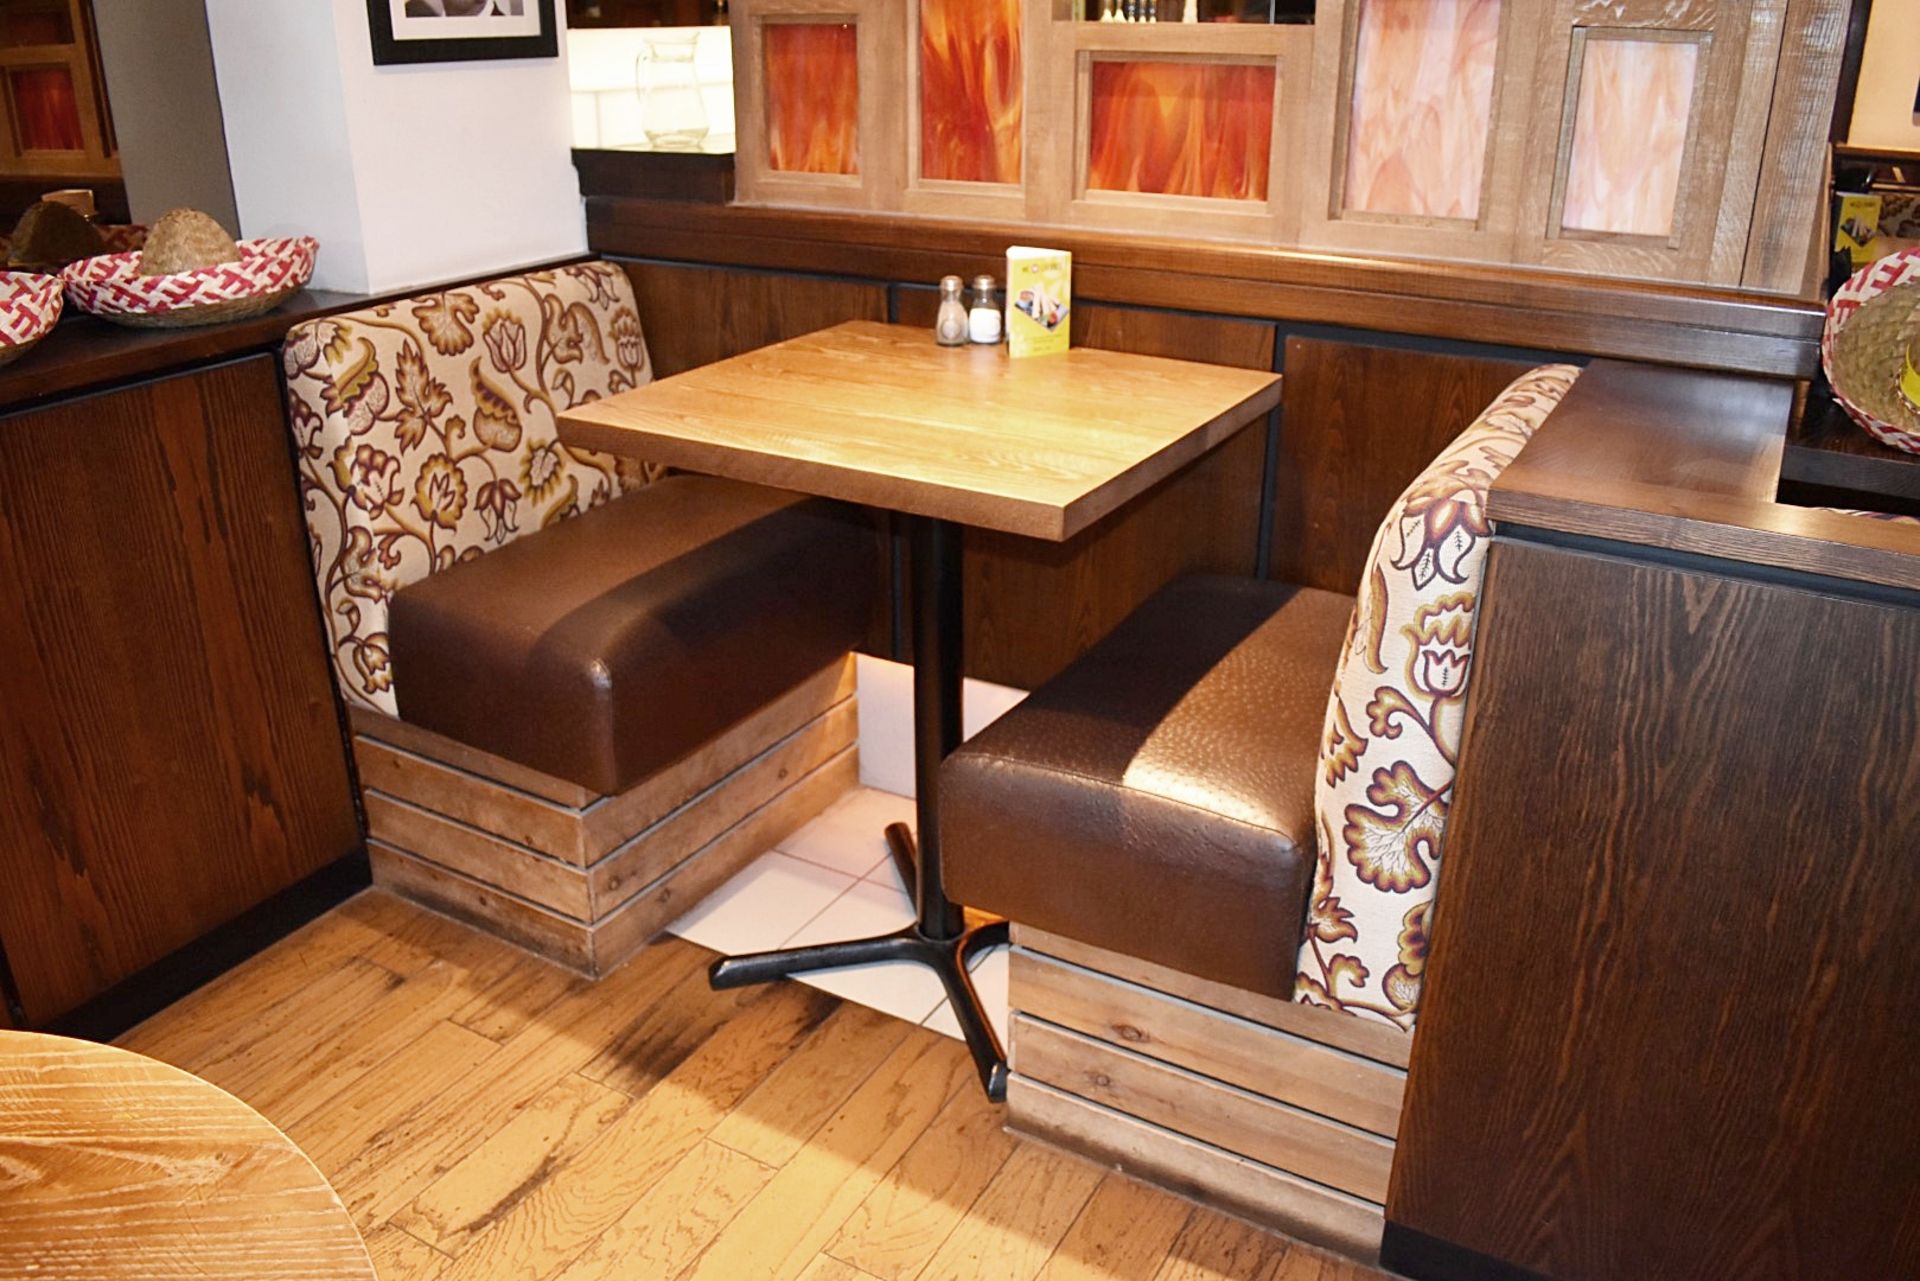 15-Pieces Of Restaurant Booth Seating Of Varying Length - Image 16 of 22